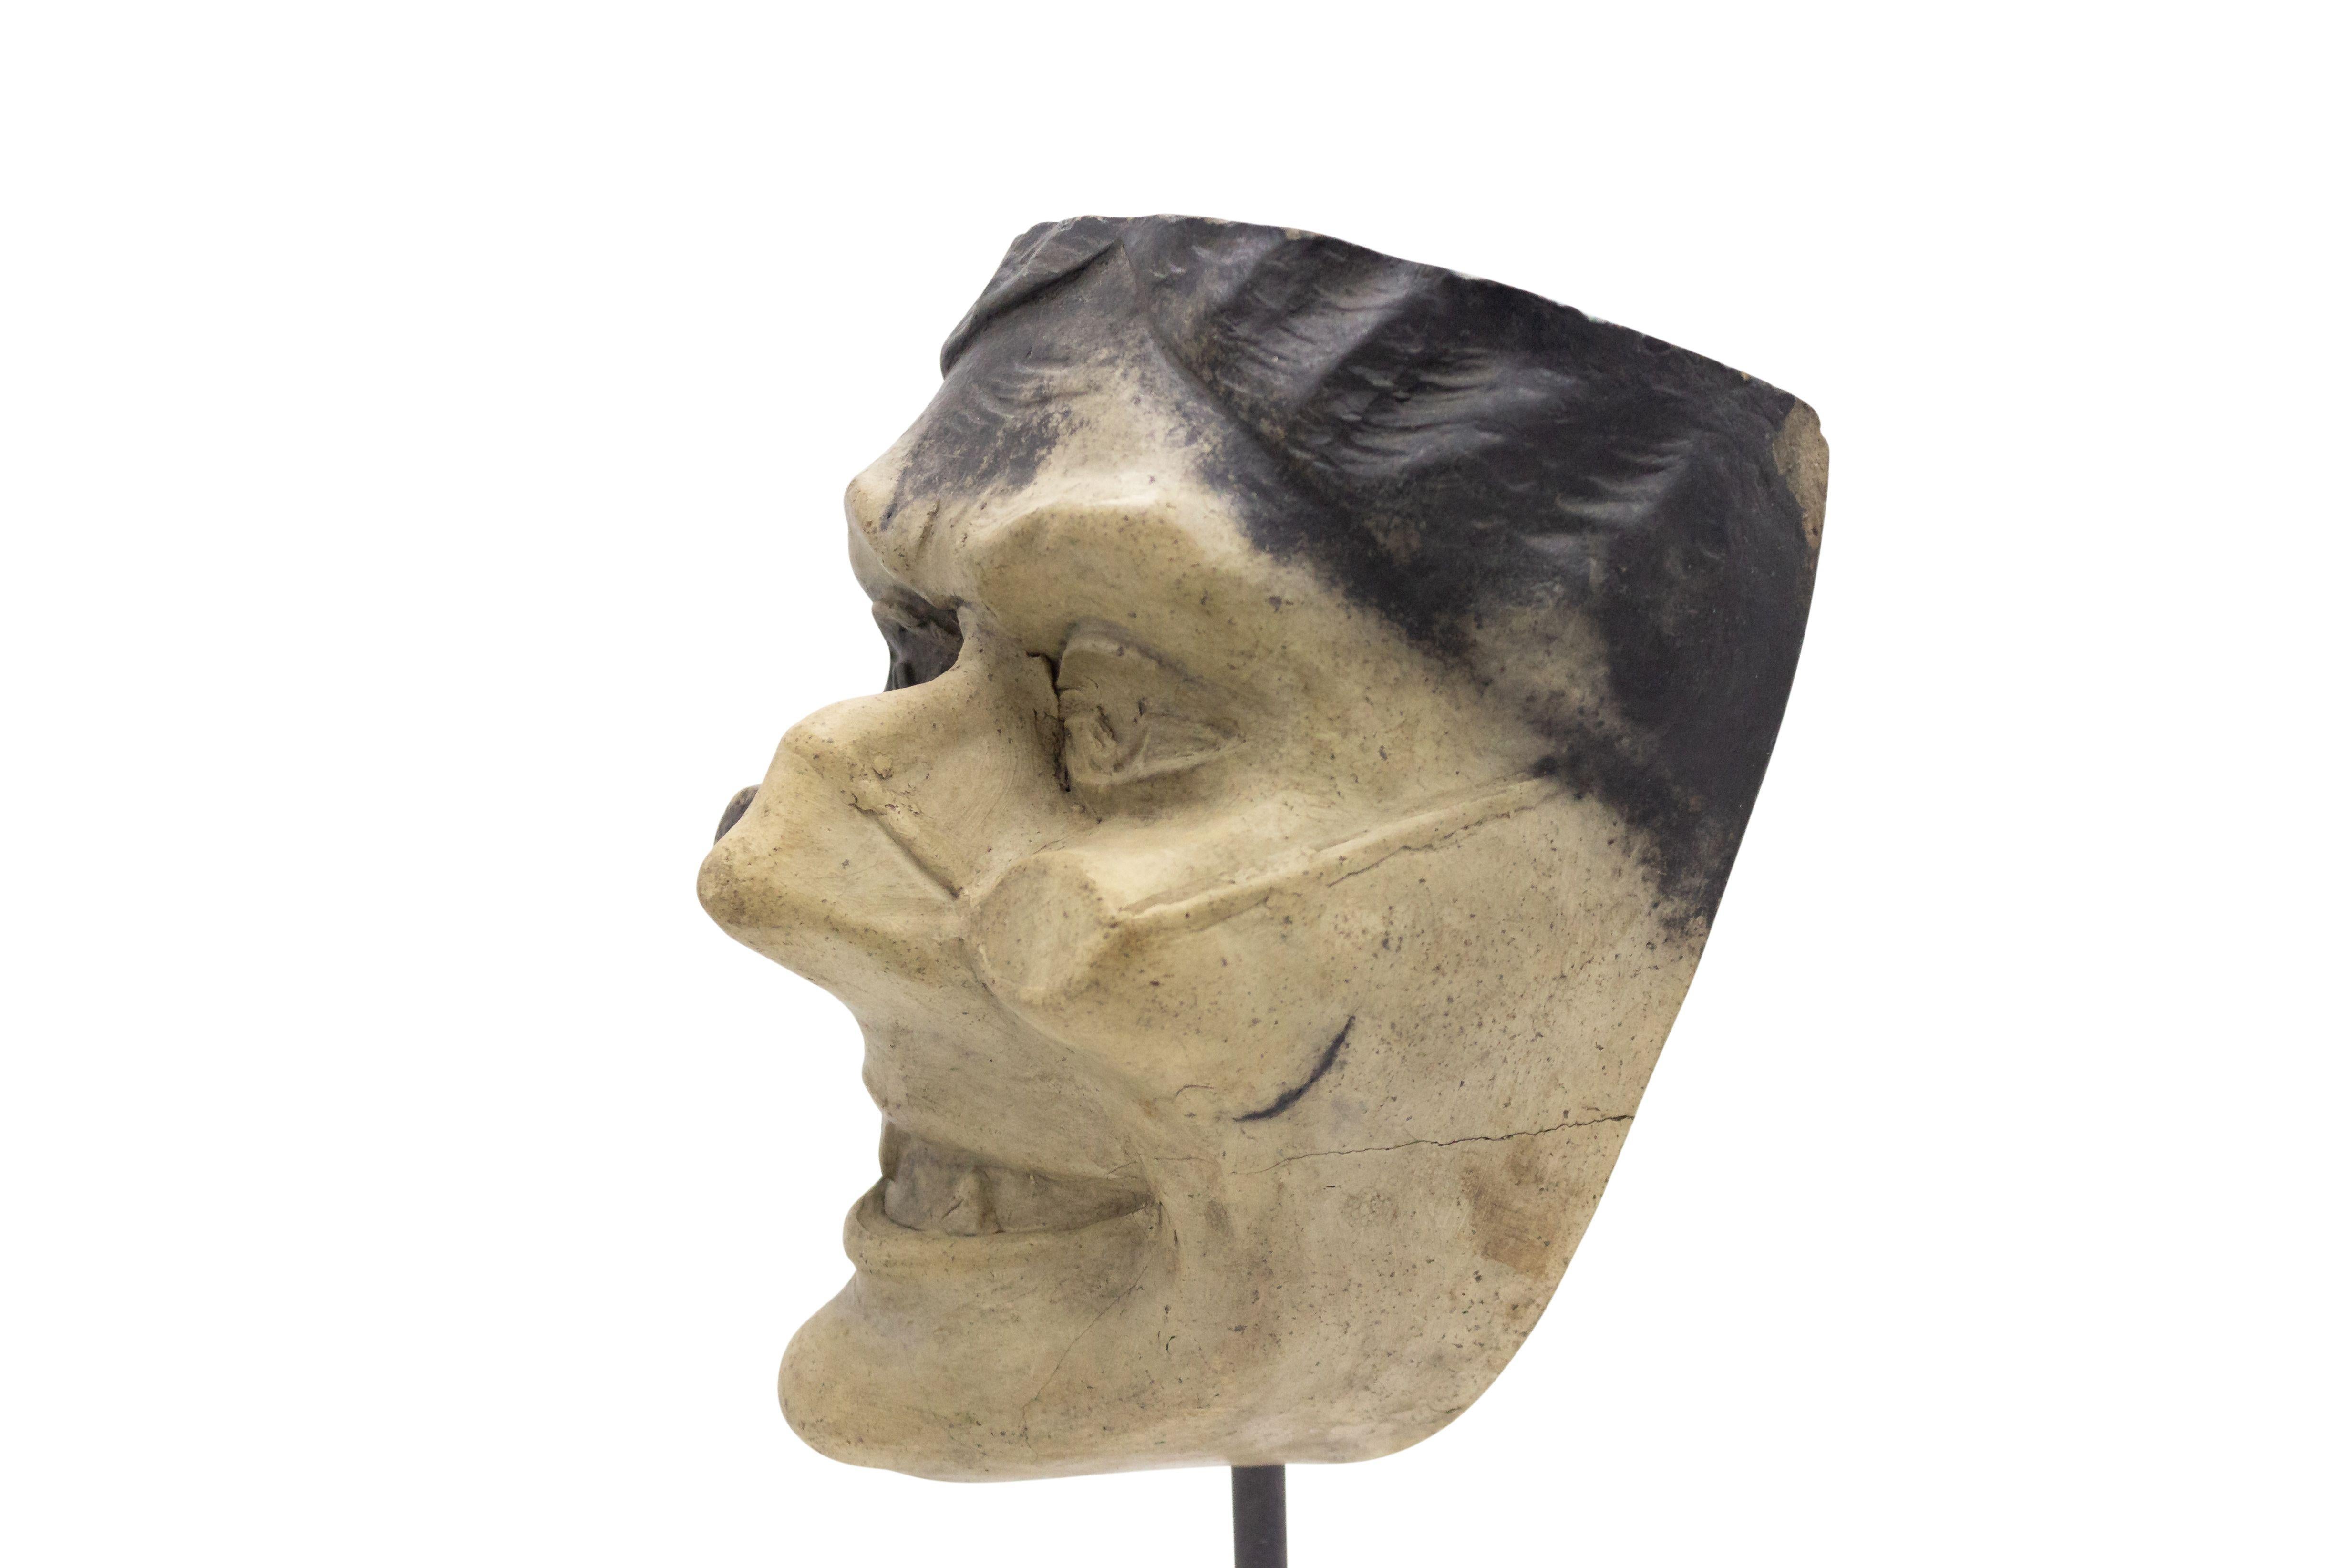 Continental German (late 19th cent) sculpted terra-cotta master mask mold of a laughing Grotesque face with glasses and pointed teeth displayed on a square black marble base stand (part of a 39 piece collection).
     